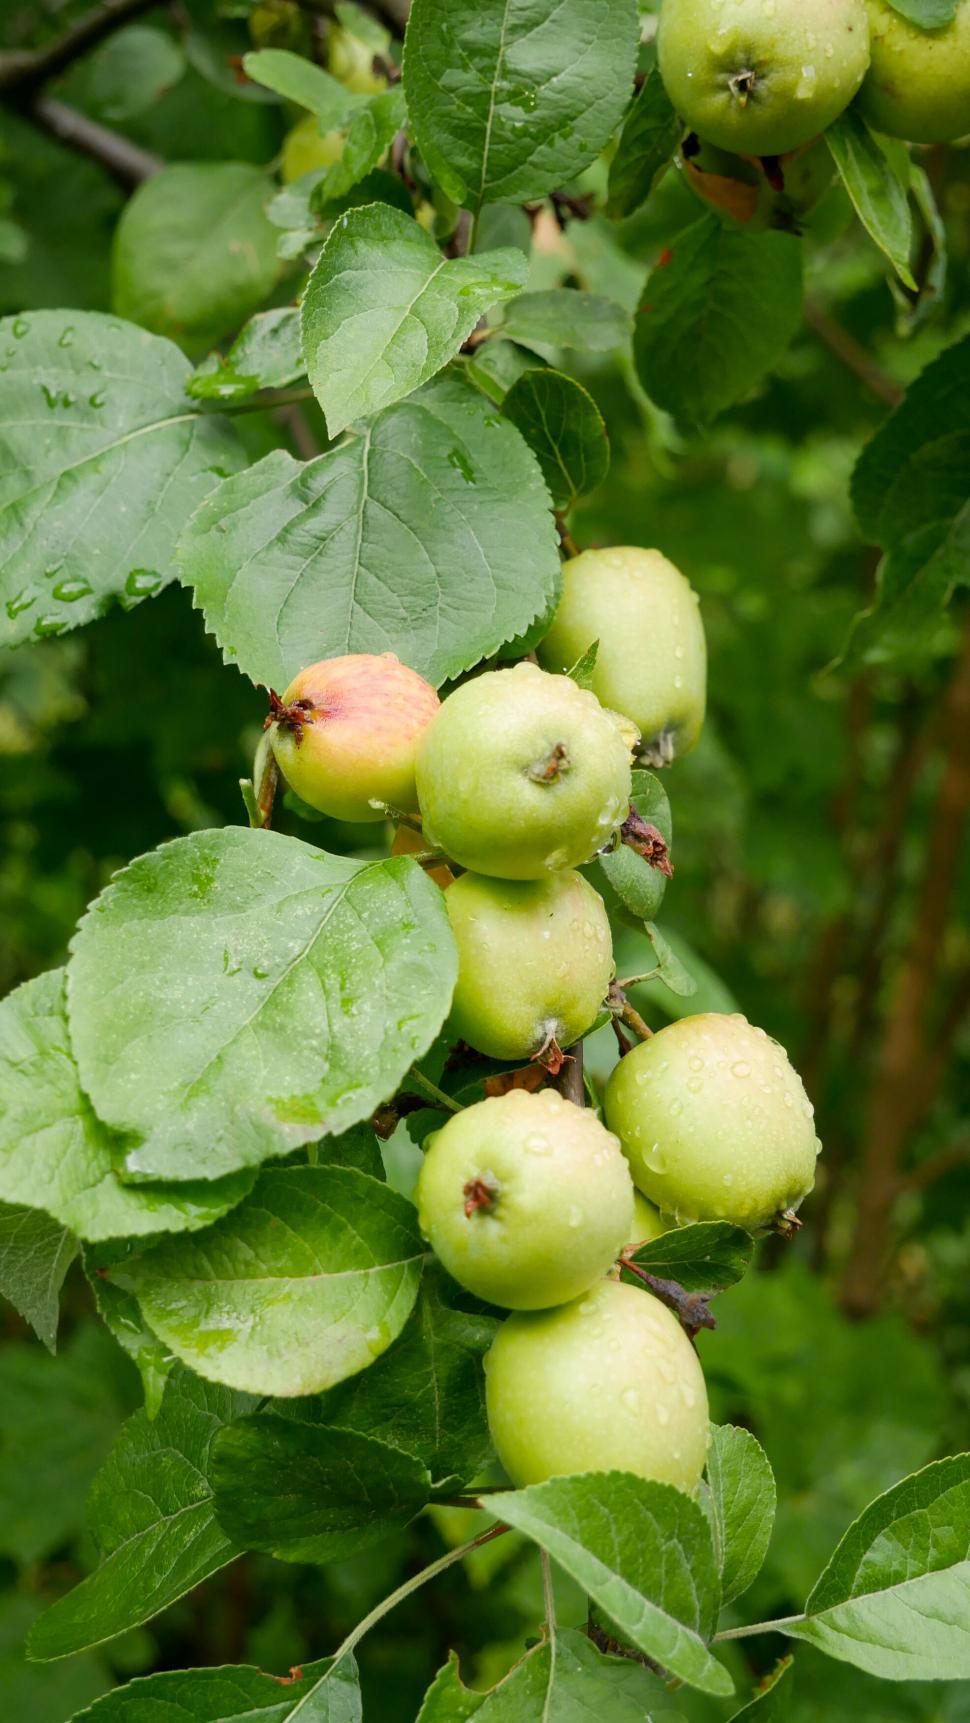 Free Image of Green apples hanging on the branch after rain 